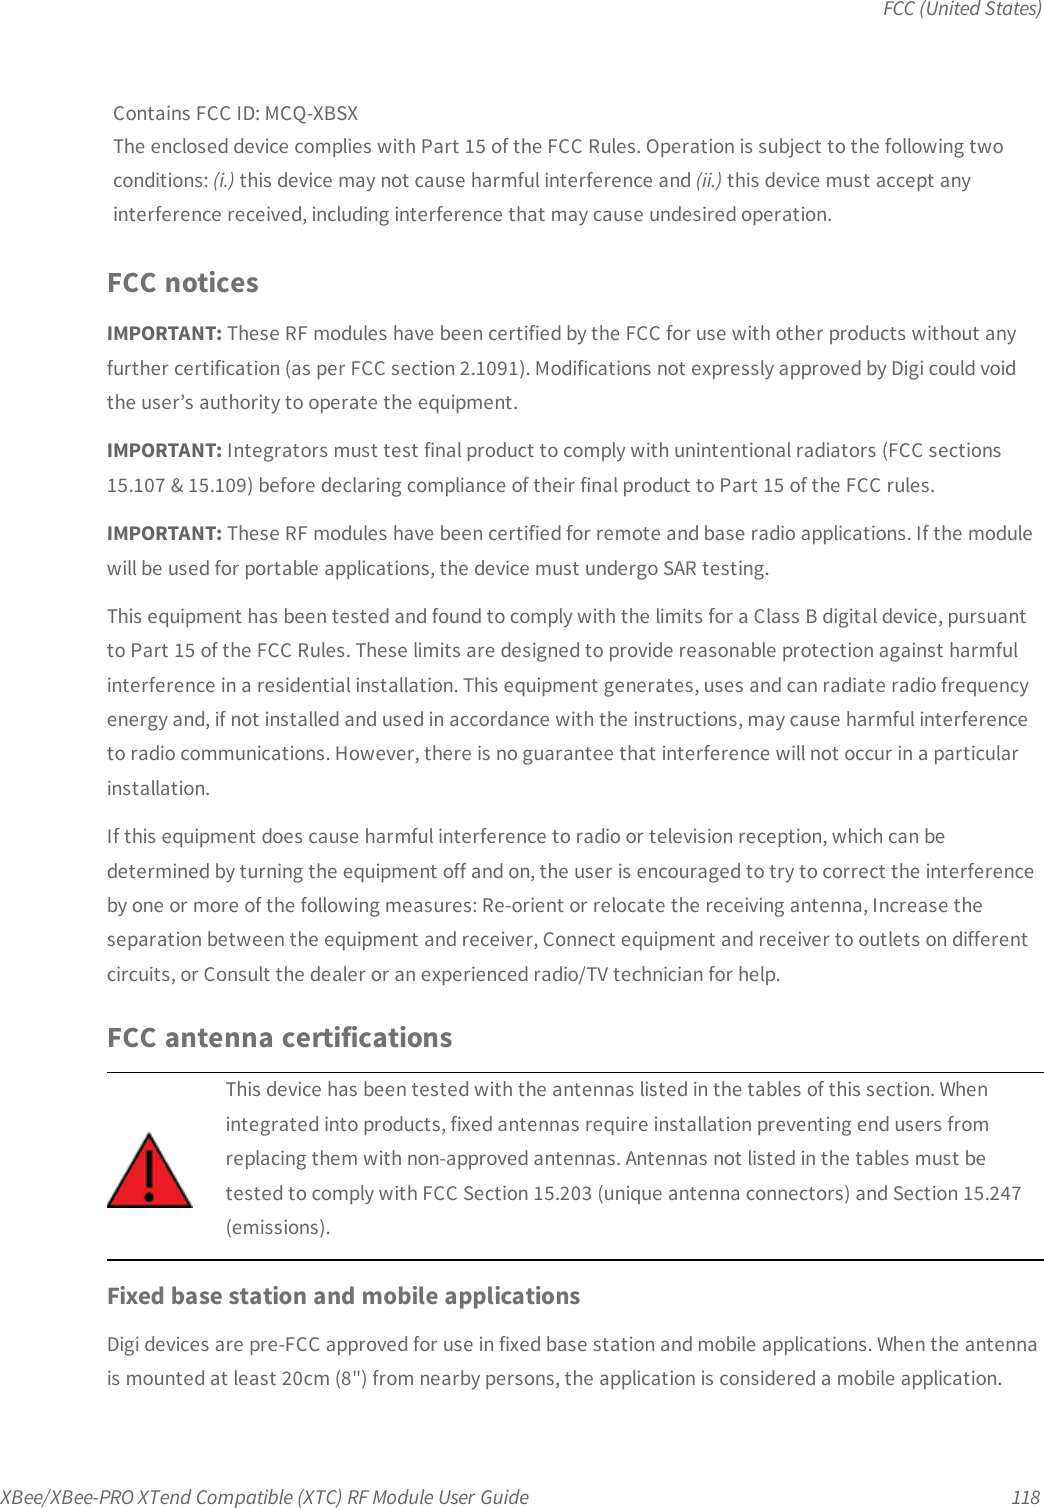 FCC (United States)XBee/XBee-PRO XTend Compatible (XTC) RF Module User Guide 118Contains FCC ID: MCQ-XBSXThe enclosed device complies with Part 15 of the FCC Rules. Operation is subject to the following twoconditions: (i.) this device may not cause harmful interference and (ii.) this device must accept anyinterference received, including interference that may cause undesired operation.FCC noticesIMPORTANT: These RF modules have been certified by the FCC for use with other products without anyfurther certification (as per FCC section 2.1091). Modifications not expressly approved by Digi could voidthe user’s authority to operate the equipment.IMPORTANT: Integrators must test final product to comply with unintentional radiators (FCC sections15.107 &amp; 15.109) before declaring compliance of their final product to Part 15 of the FCC rules.IMPORTANT: These RF modules have been certified for remote and base radio applications. If the modulewill be used for portable applications, the device must undergo SAR testing.This equipment has been tested and found to comply with the limits for a Class B digital device, pursuantto Part 15 of the FCC Rules. These limits are designed to provide reasonable protection against harmfulinterference in a residential installation. This equipment generates, uses and can radiate radio frequencyenergy and, if not installed and used in accordance with the instructions, may cause harmful interferenceto radio communications. However, there is no guarantee that interference will not occur in a particularinstallation.If this equipment does cause harmful interference to radio or television reception, which can bedetermined by turning the equipment off and on, the user is encouraged to try to correct the interferenceby one or more of the following measures: Re-orient or relocate the receiving antenna, Increase theseparation between the equipment and receiver, Connect equipment and receiver to outlets on differentcircuits, or Consult the dealer or an experienced radio/TV technician for help.FCC antenna certificationsThis device has been tested with the antennas listed in the tables of this section. Whenintegrated into products, fixed antennas require installation preventing end users fromreplacing them with non-approved antennas. Antennas not listed in the tables must betested to comply with FCC Section 15.203 (unique antenna connectors) and Section 15.247(emissions).Fixed base station and mobile applicationsDigi devices are pre-FCC approved for use in fixed base station and mobile applications. When the antennais mounted at least 20cm (8&quot;) from nearby persons, the application is considered a mobile application.